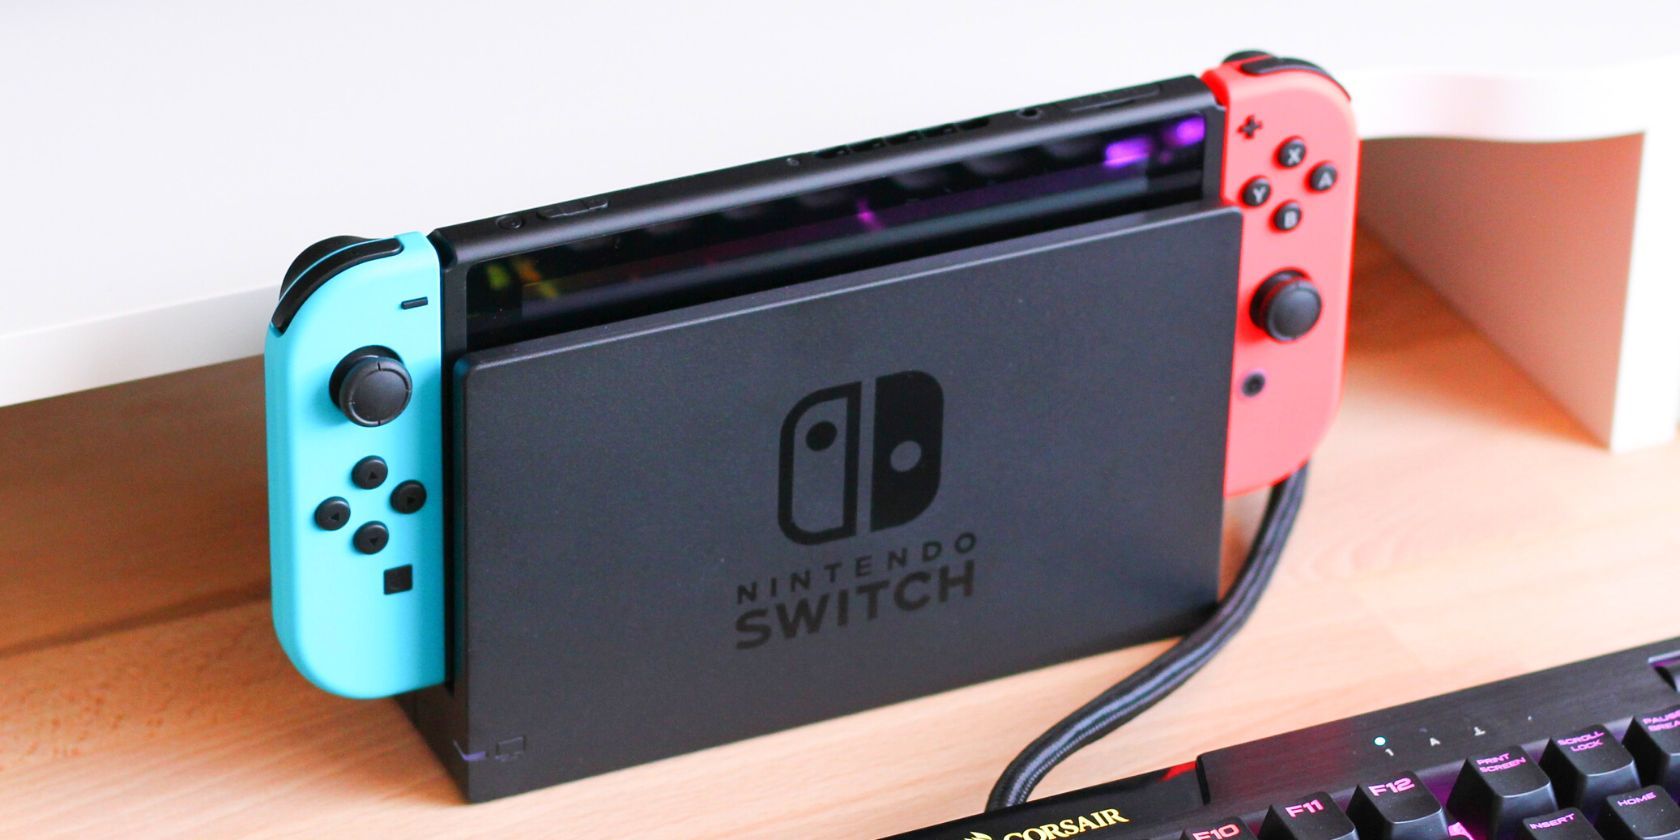 Close up of a Nintendo Switch docked on a desk